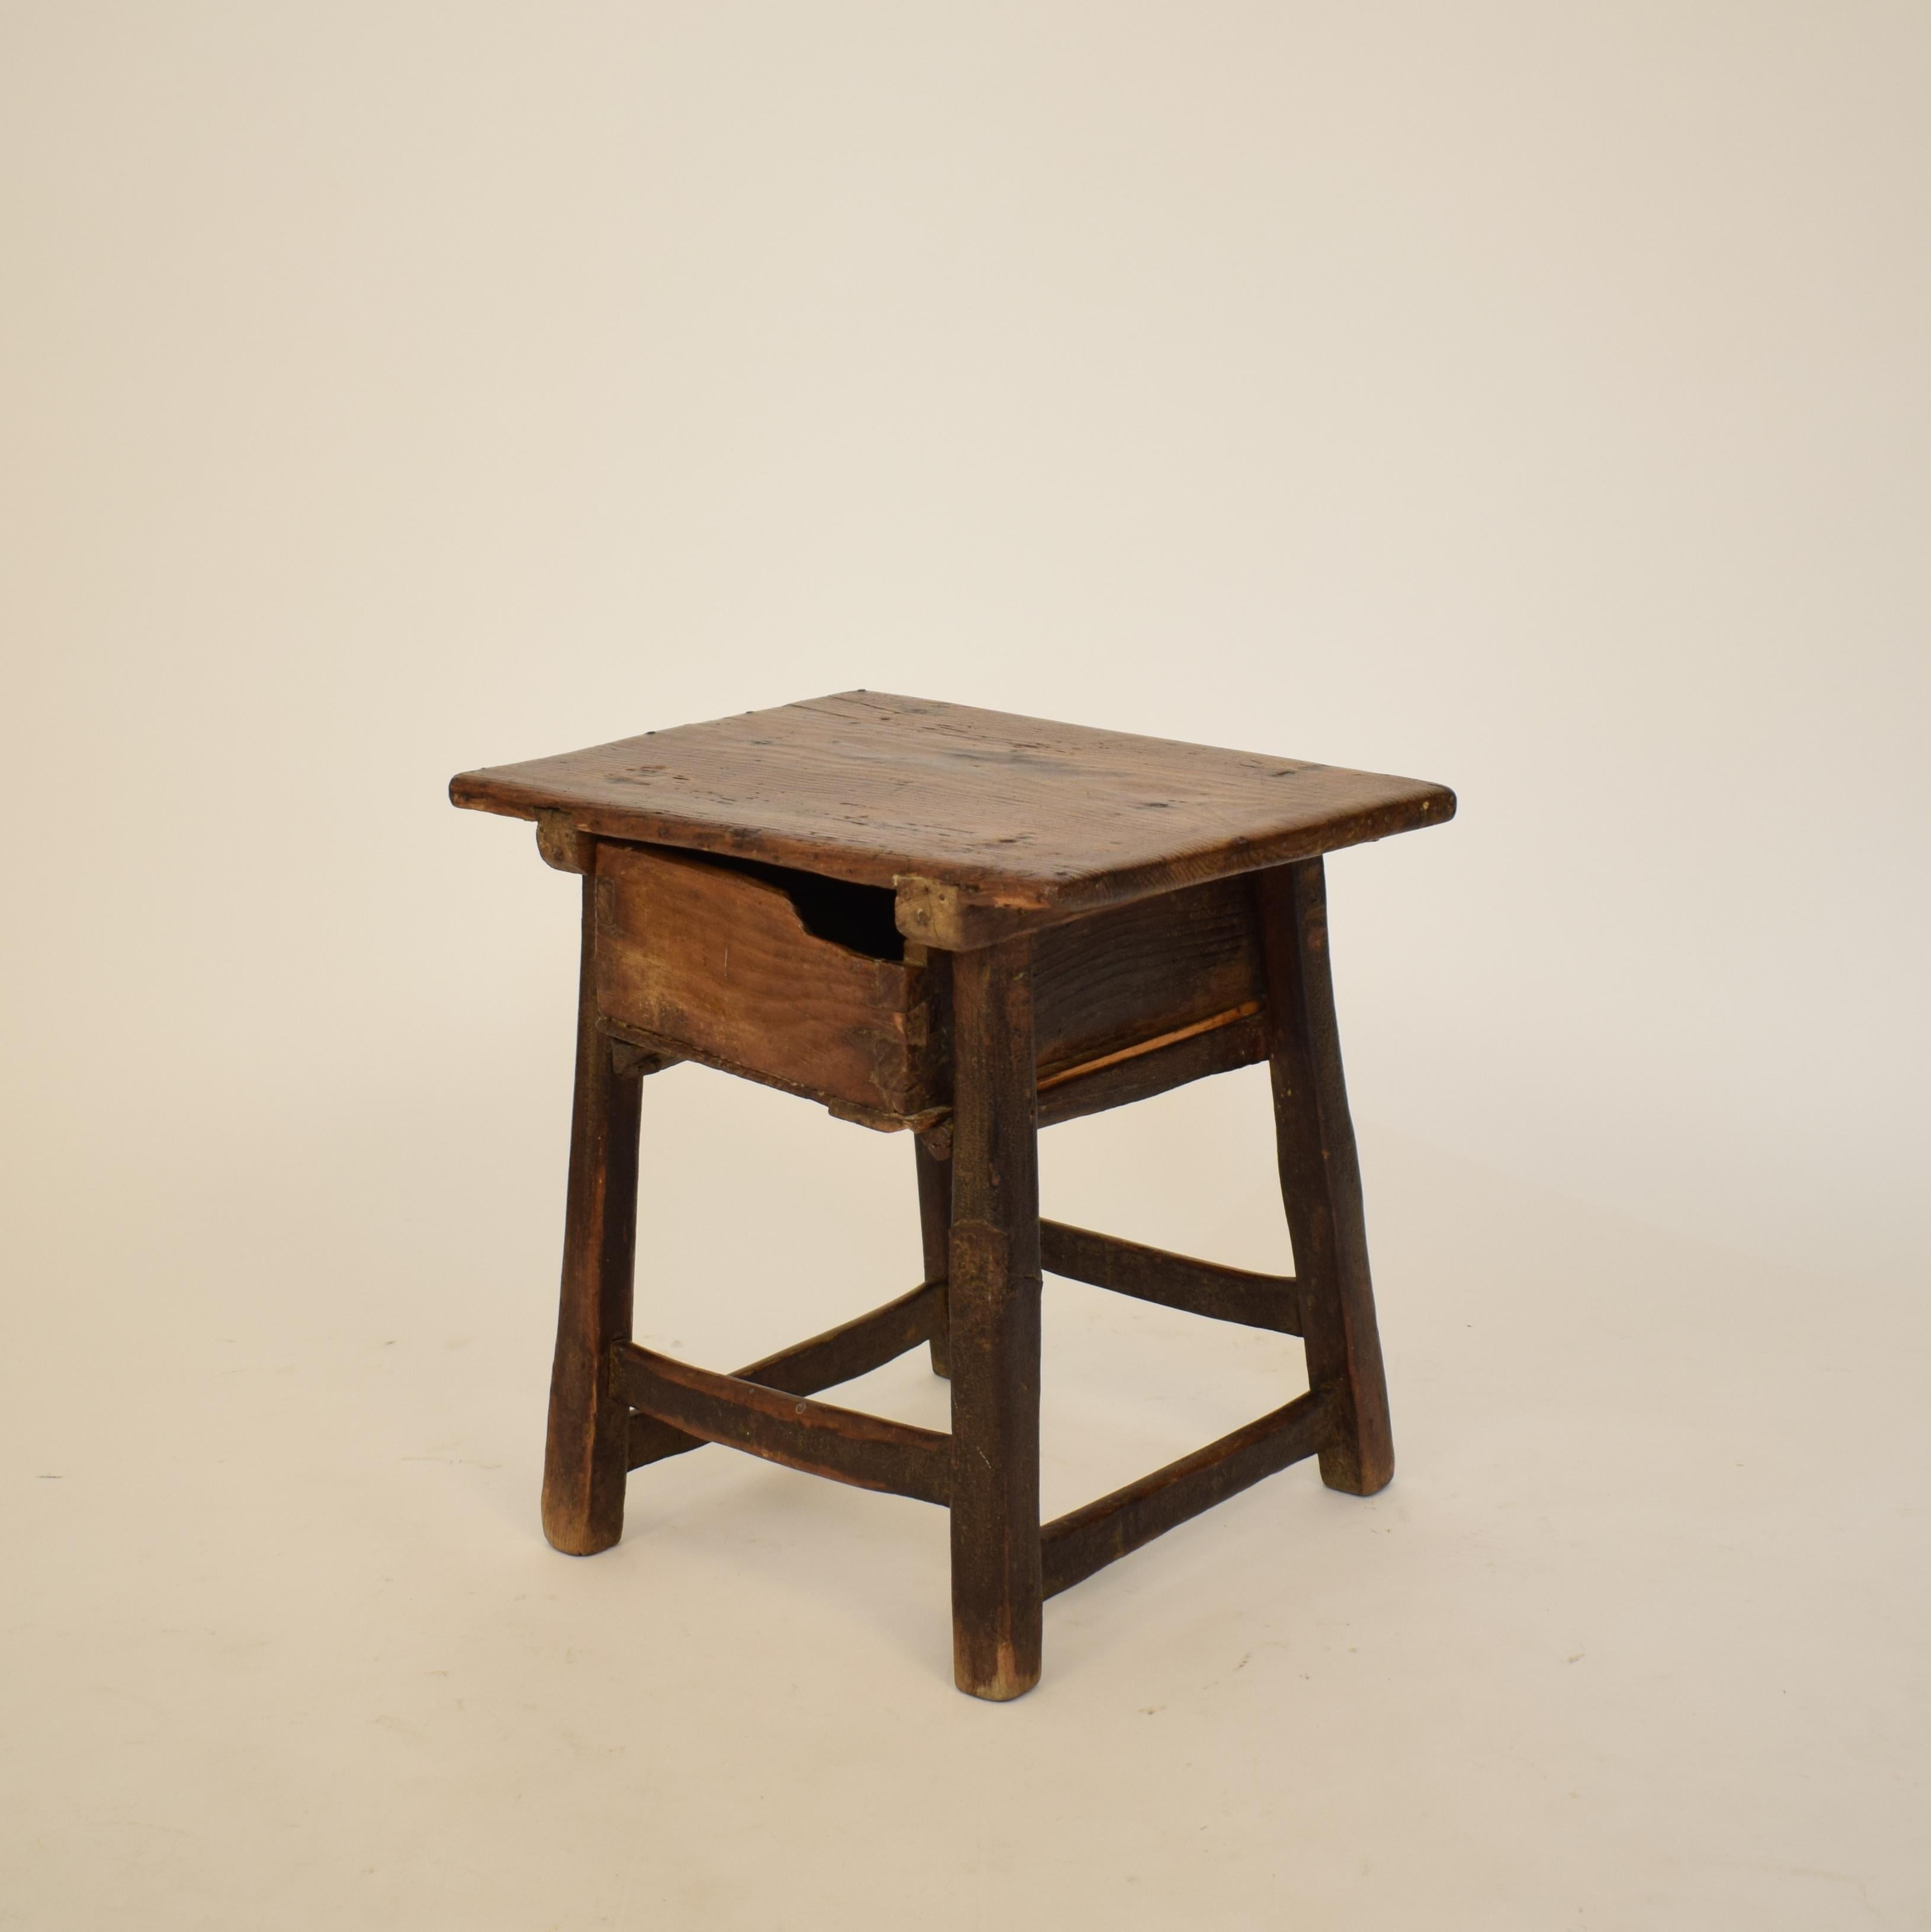 This beautiful late 17th century Primitive small pine side table with a drawer shows its original condition.
It got cleaned and waxed. The surface is very nice a has a fantastic patina.
The tables goes with a lot of interior like Wabi-Sabi,